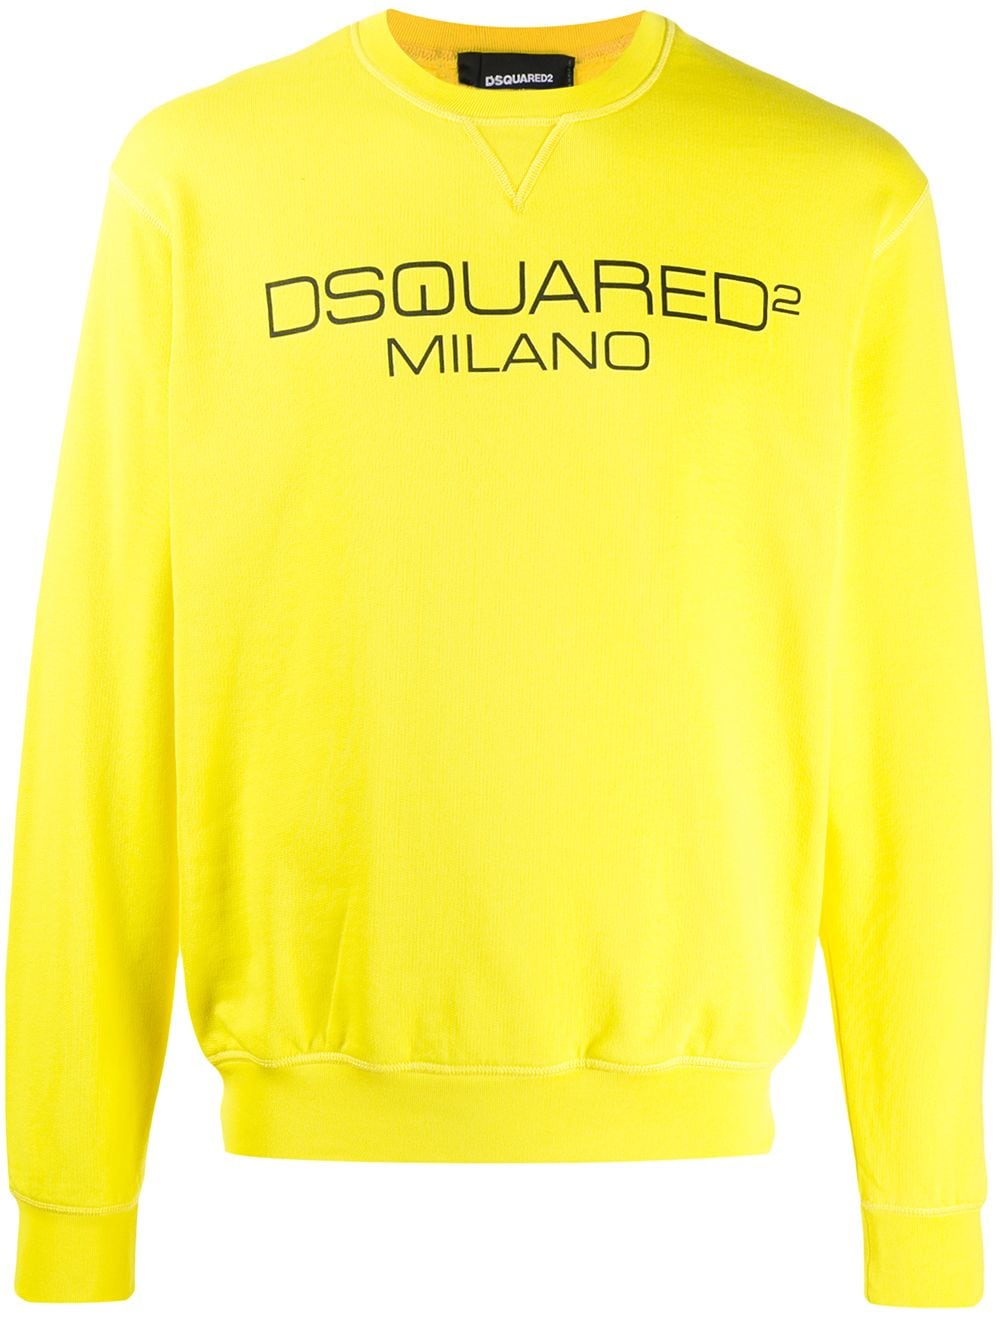 dsquared milano opening hours